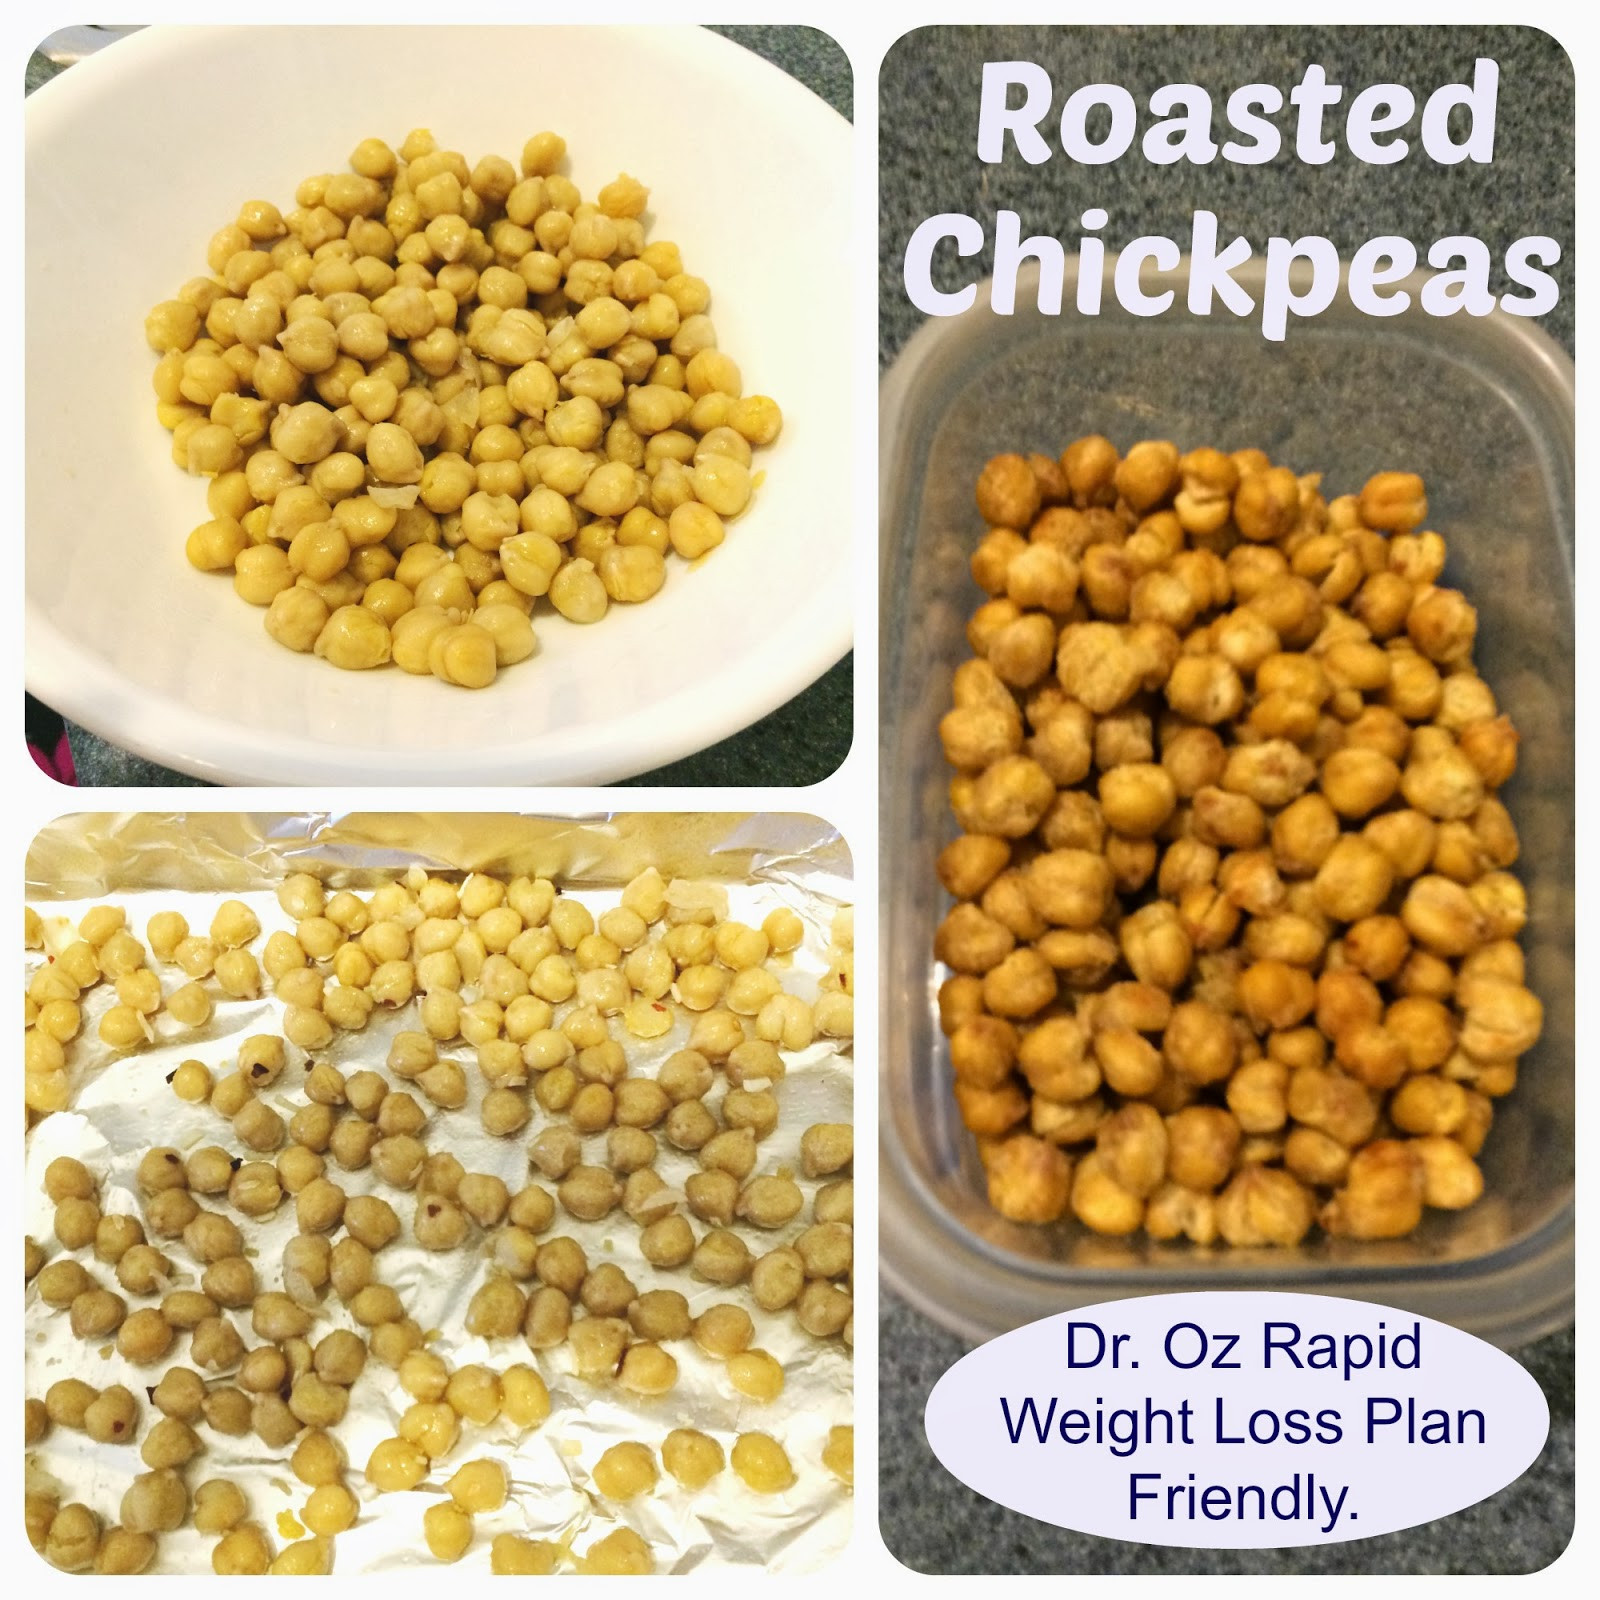 Doctor Oz Healthy Snacks
 Roasted Chickpeas Yummy Snack and Dr Oz Rapid Weight